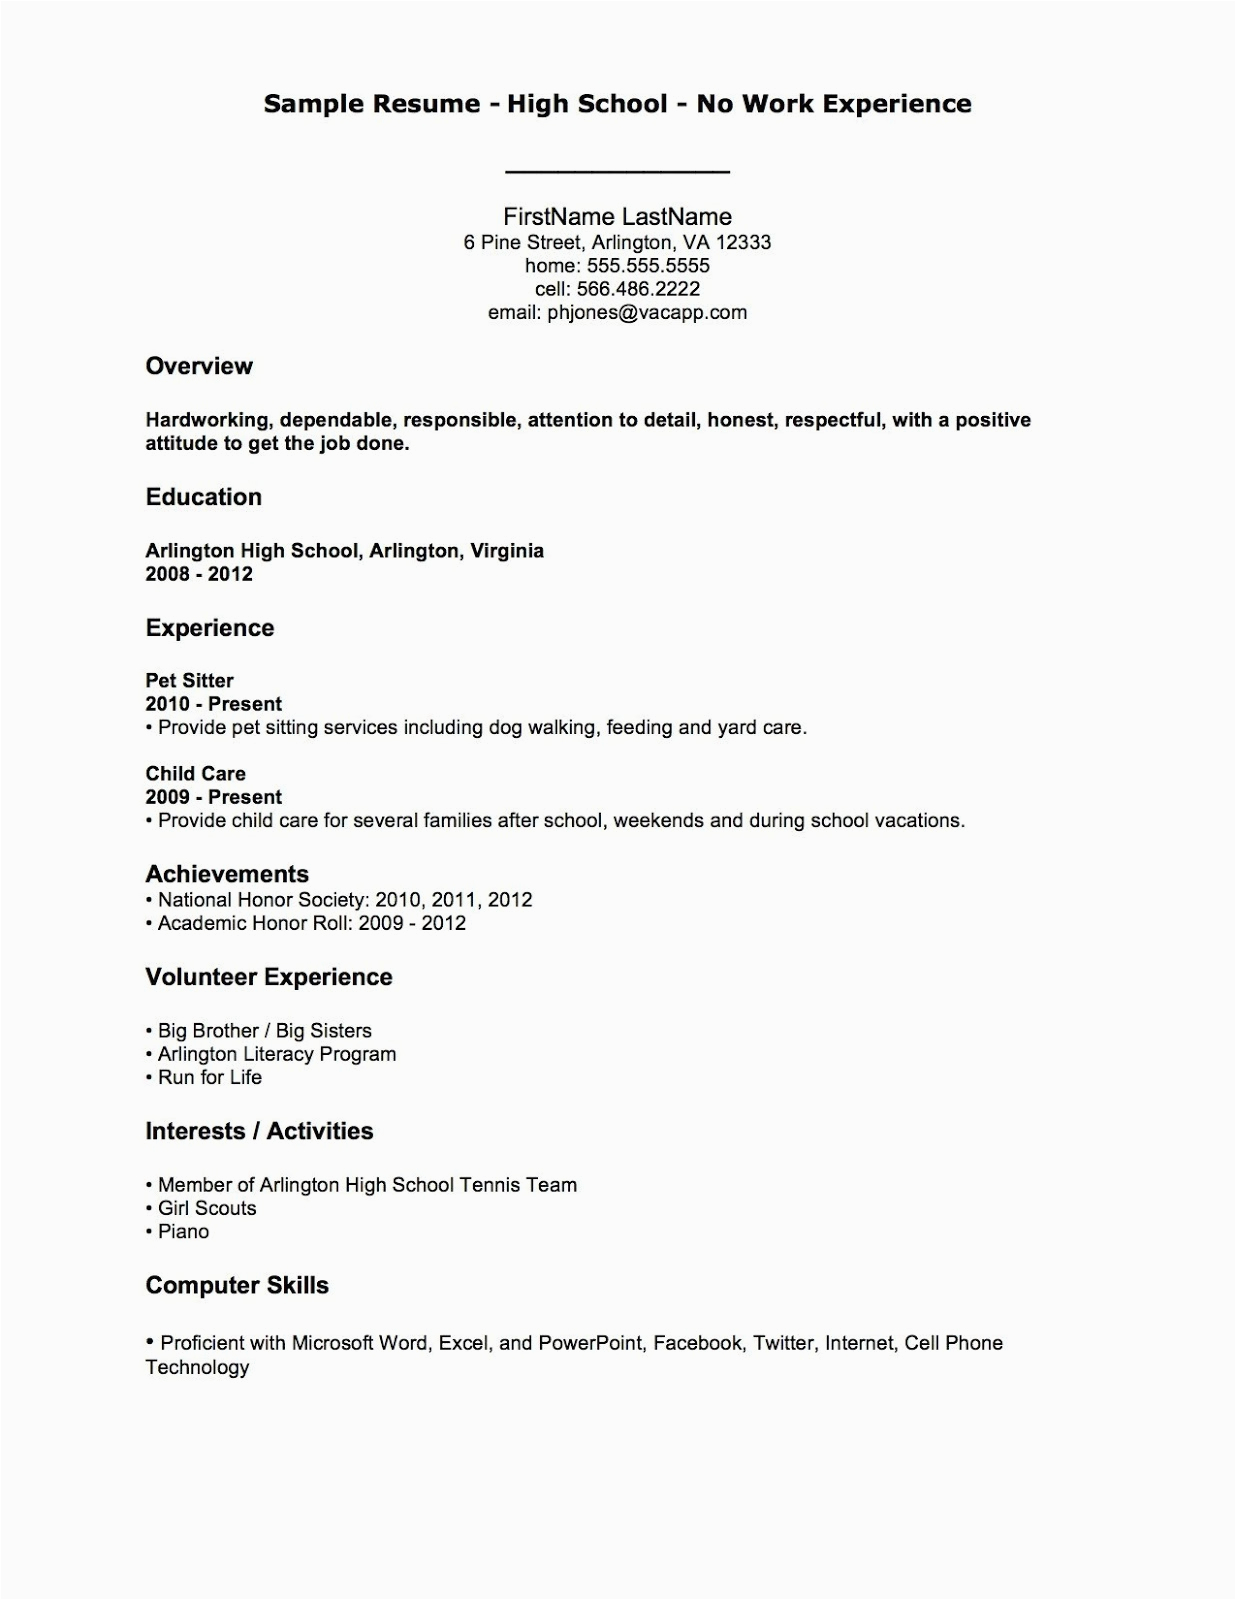 Sample Resume W Experience is One Job for 14 Years Resume format E Job Resume format